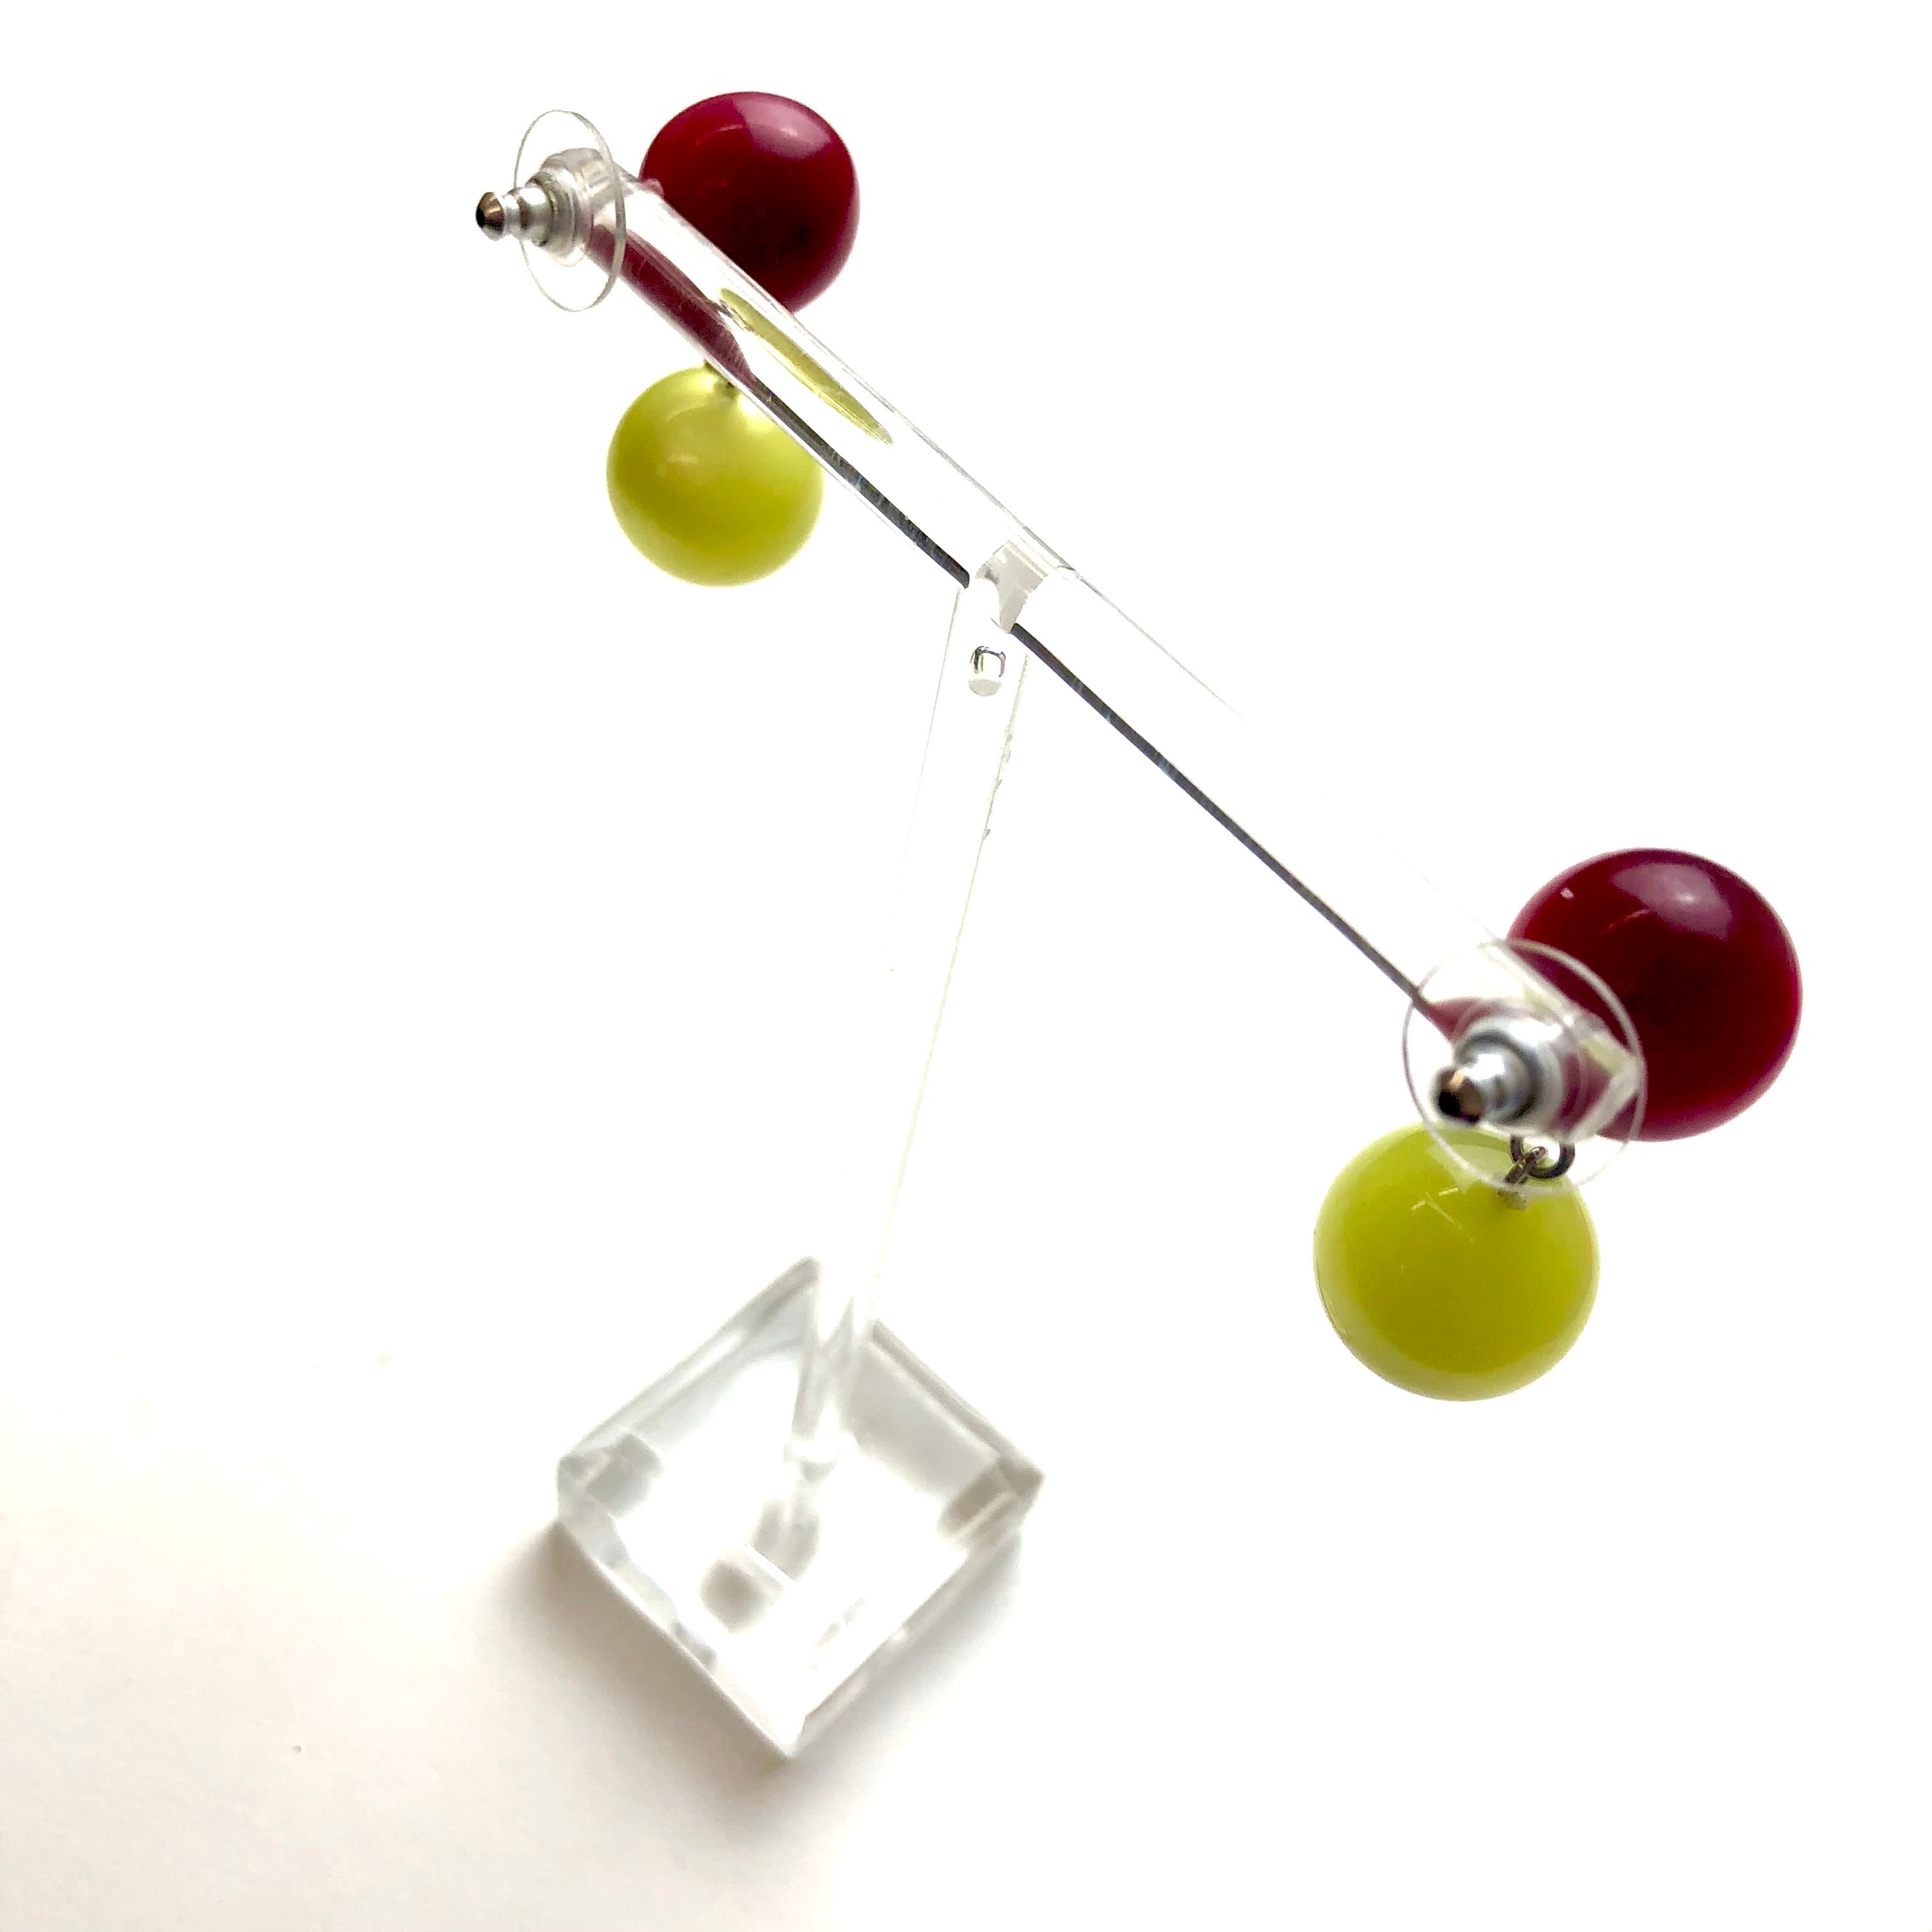 Cranberry and Butter Moonglow Lollipop Drop Earrings